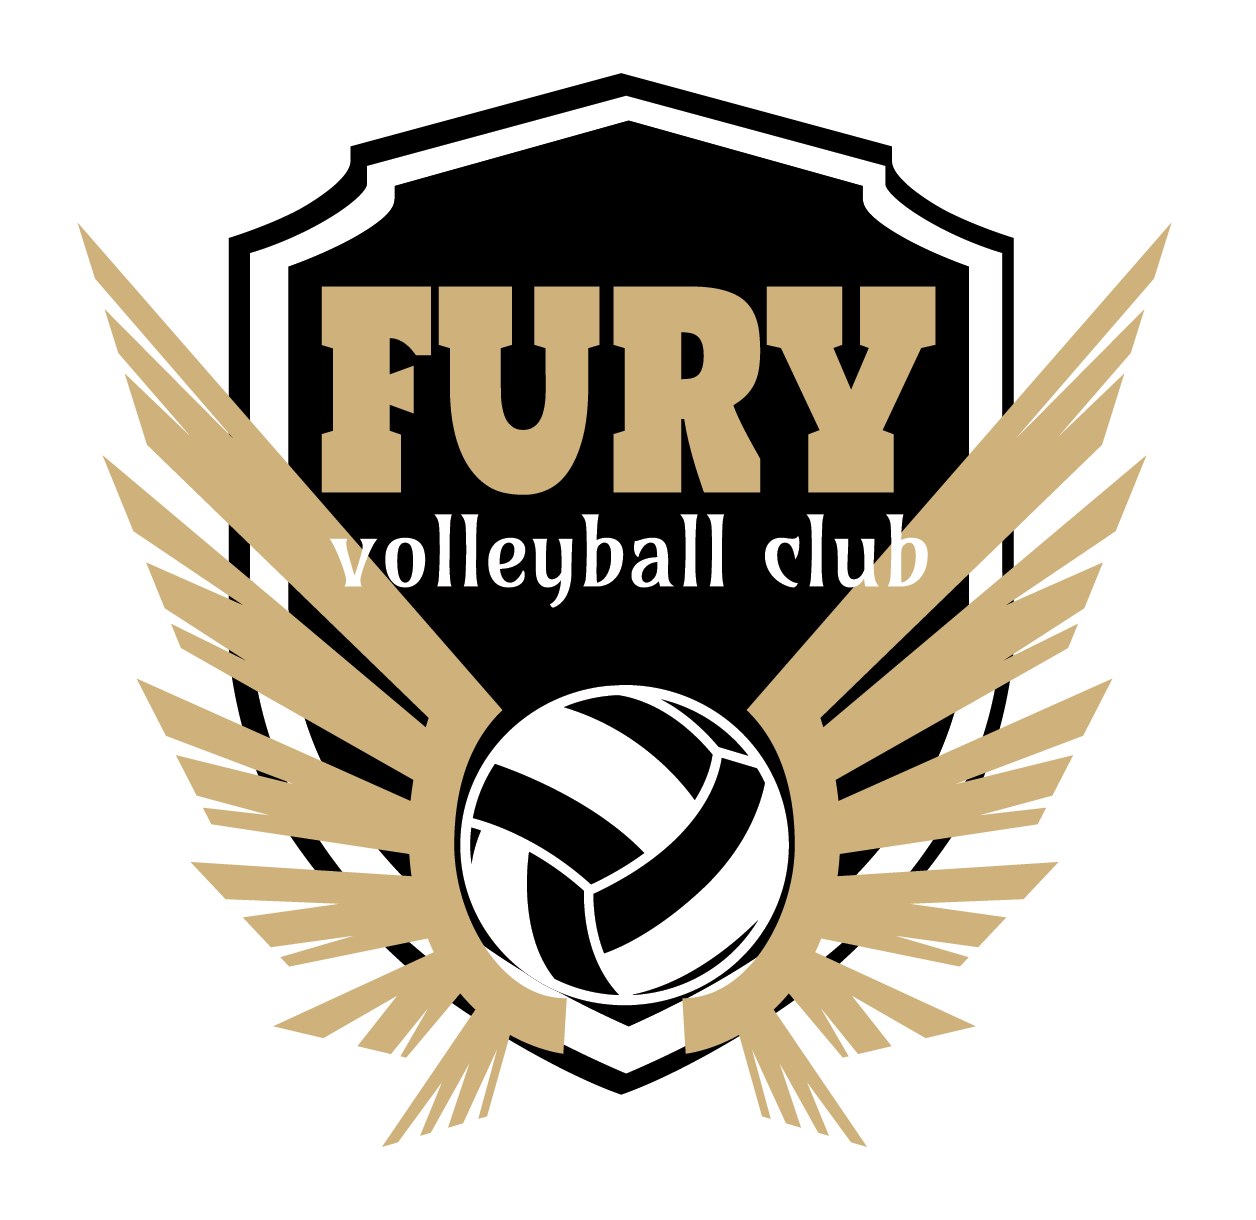 EP Fury Volleyball